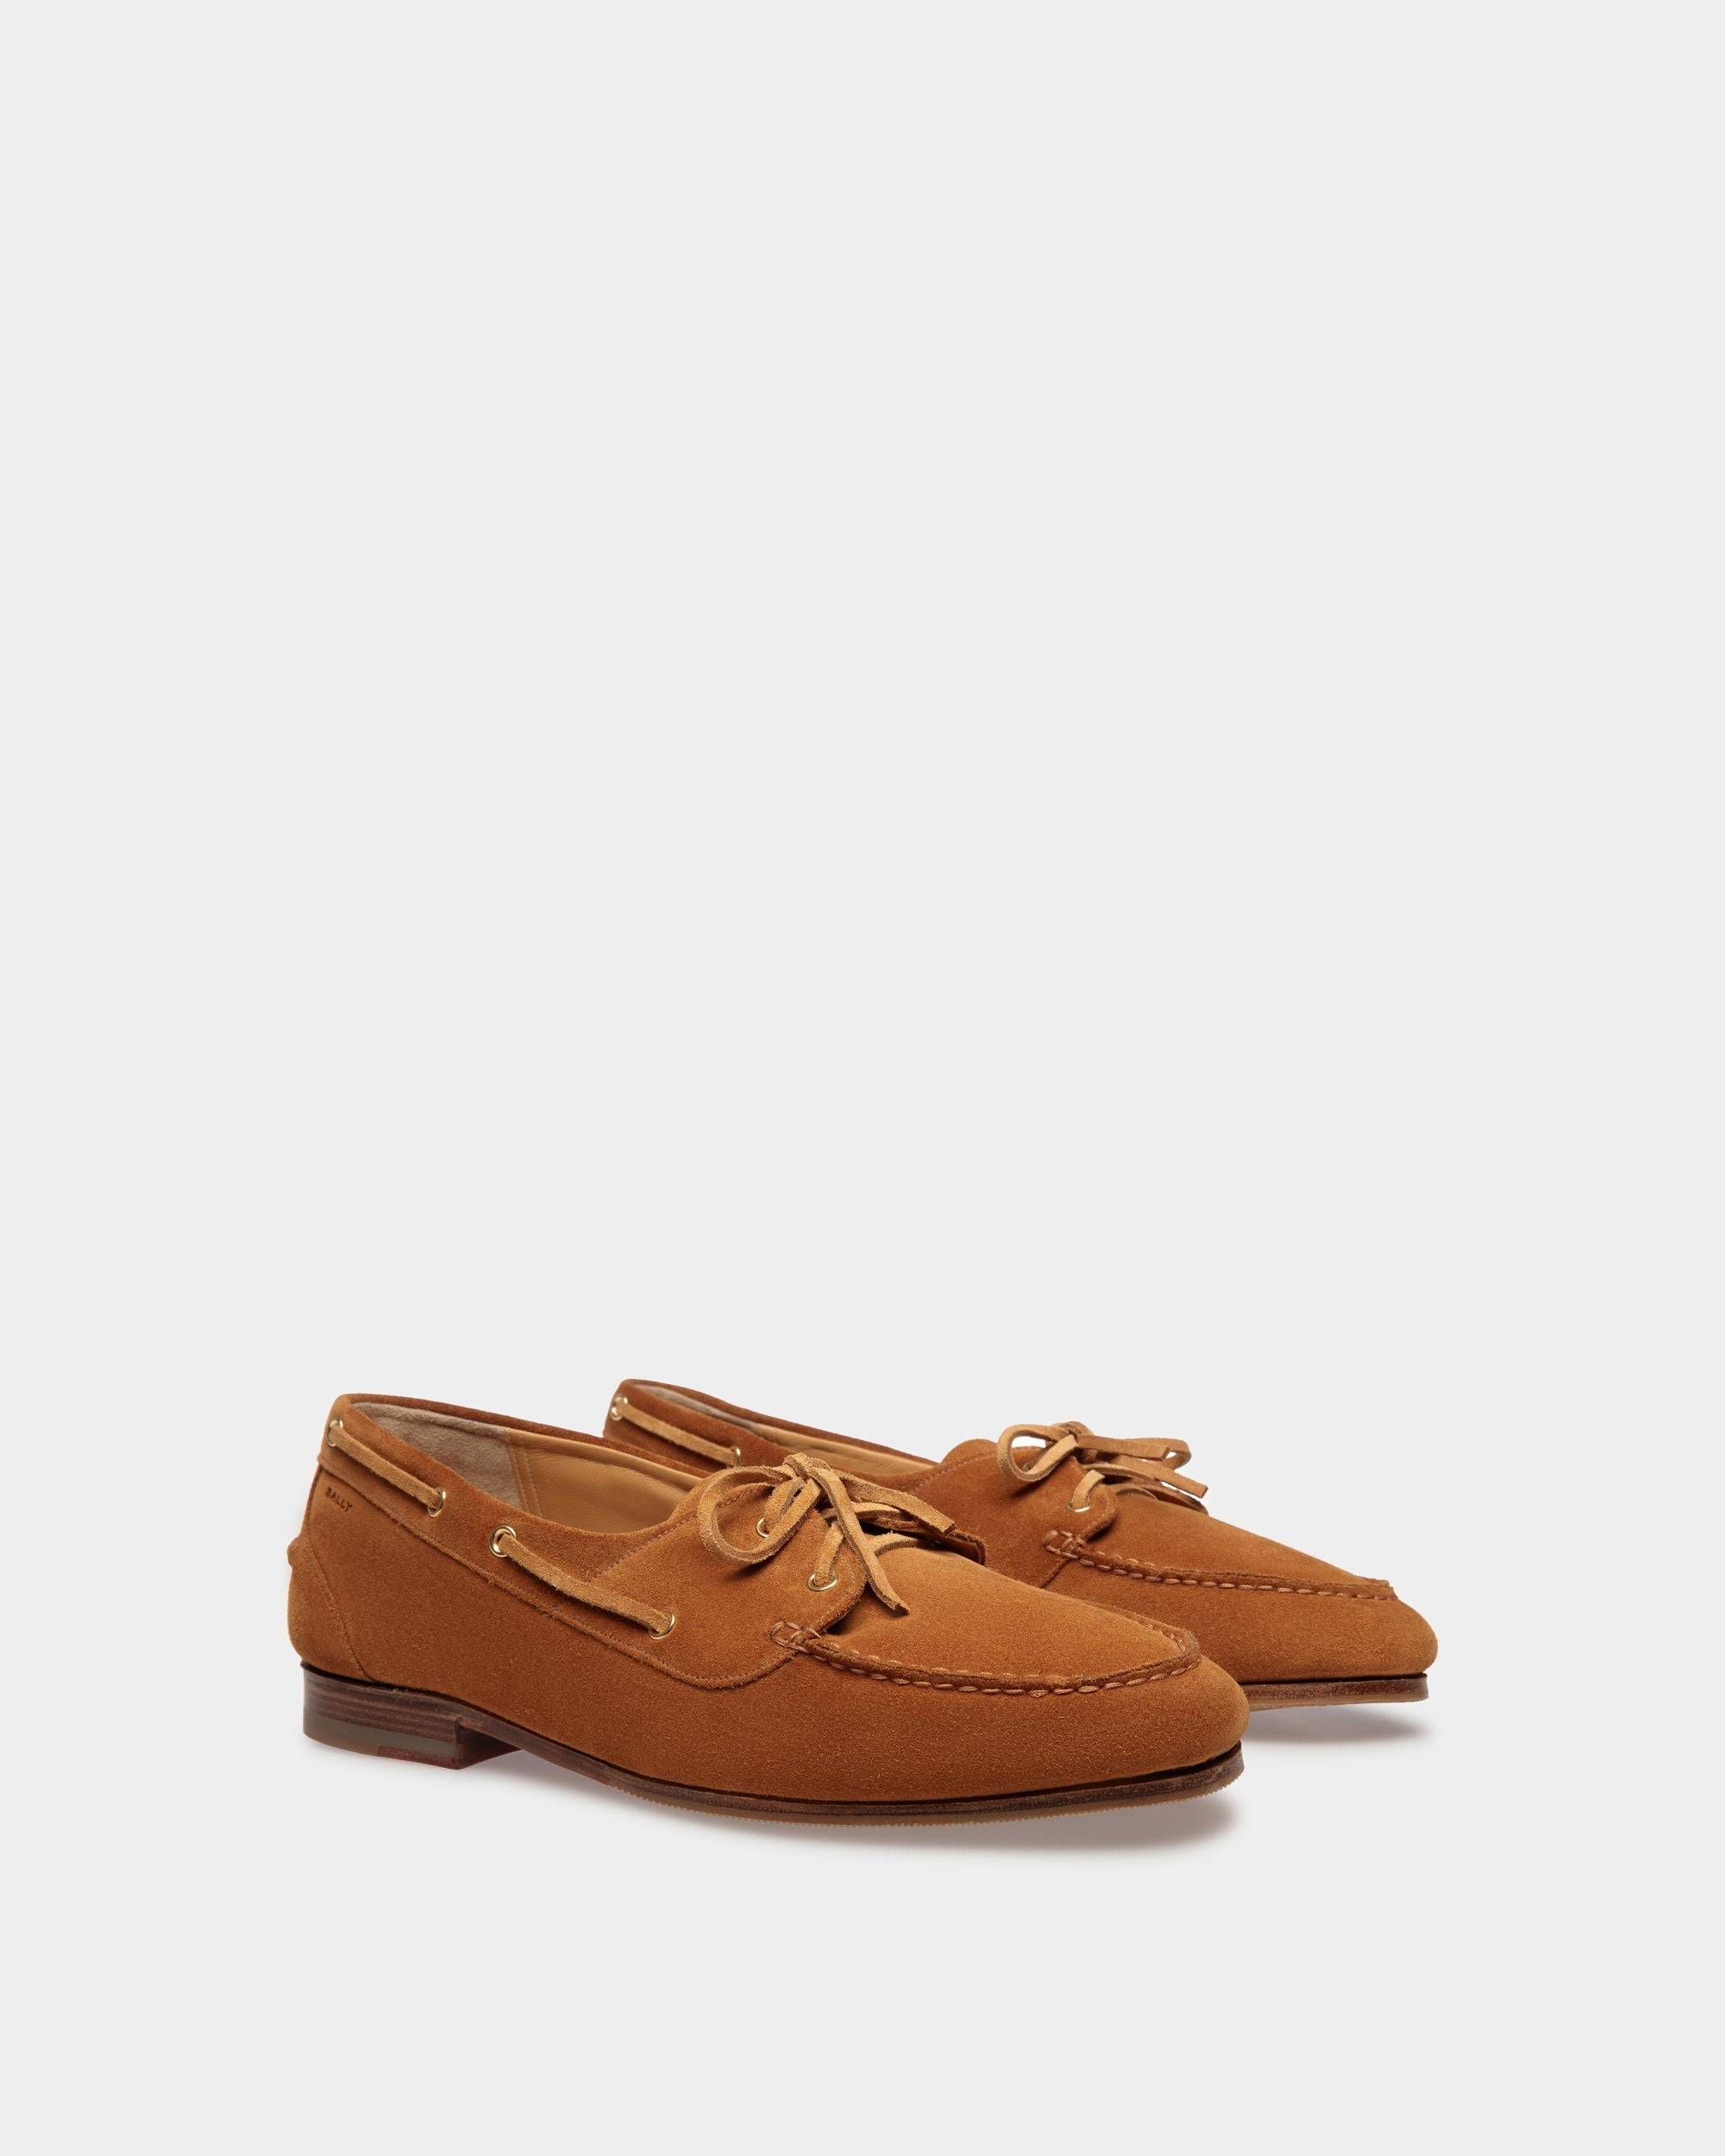 Plume | Men's Moccasin in Brown Suede| Bally | Still Life 3/4 Front